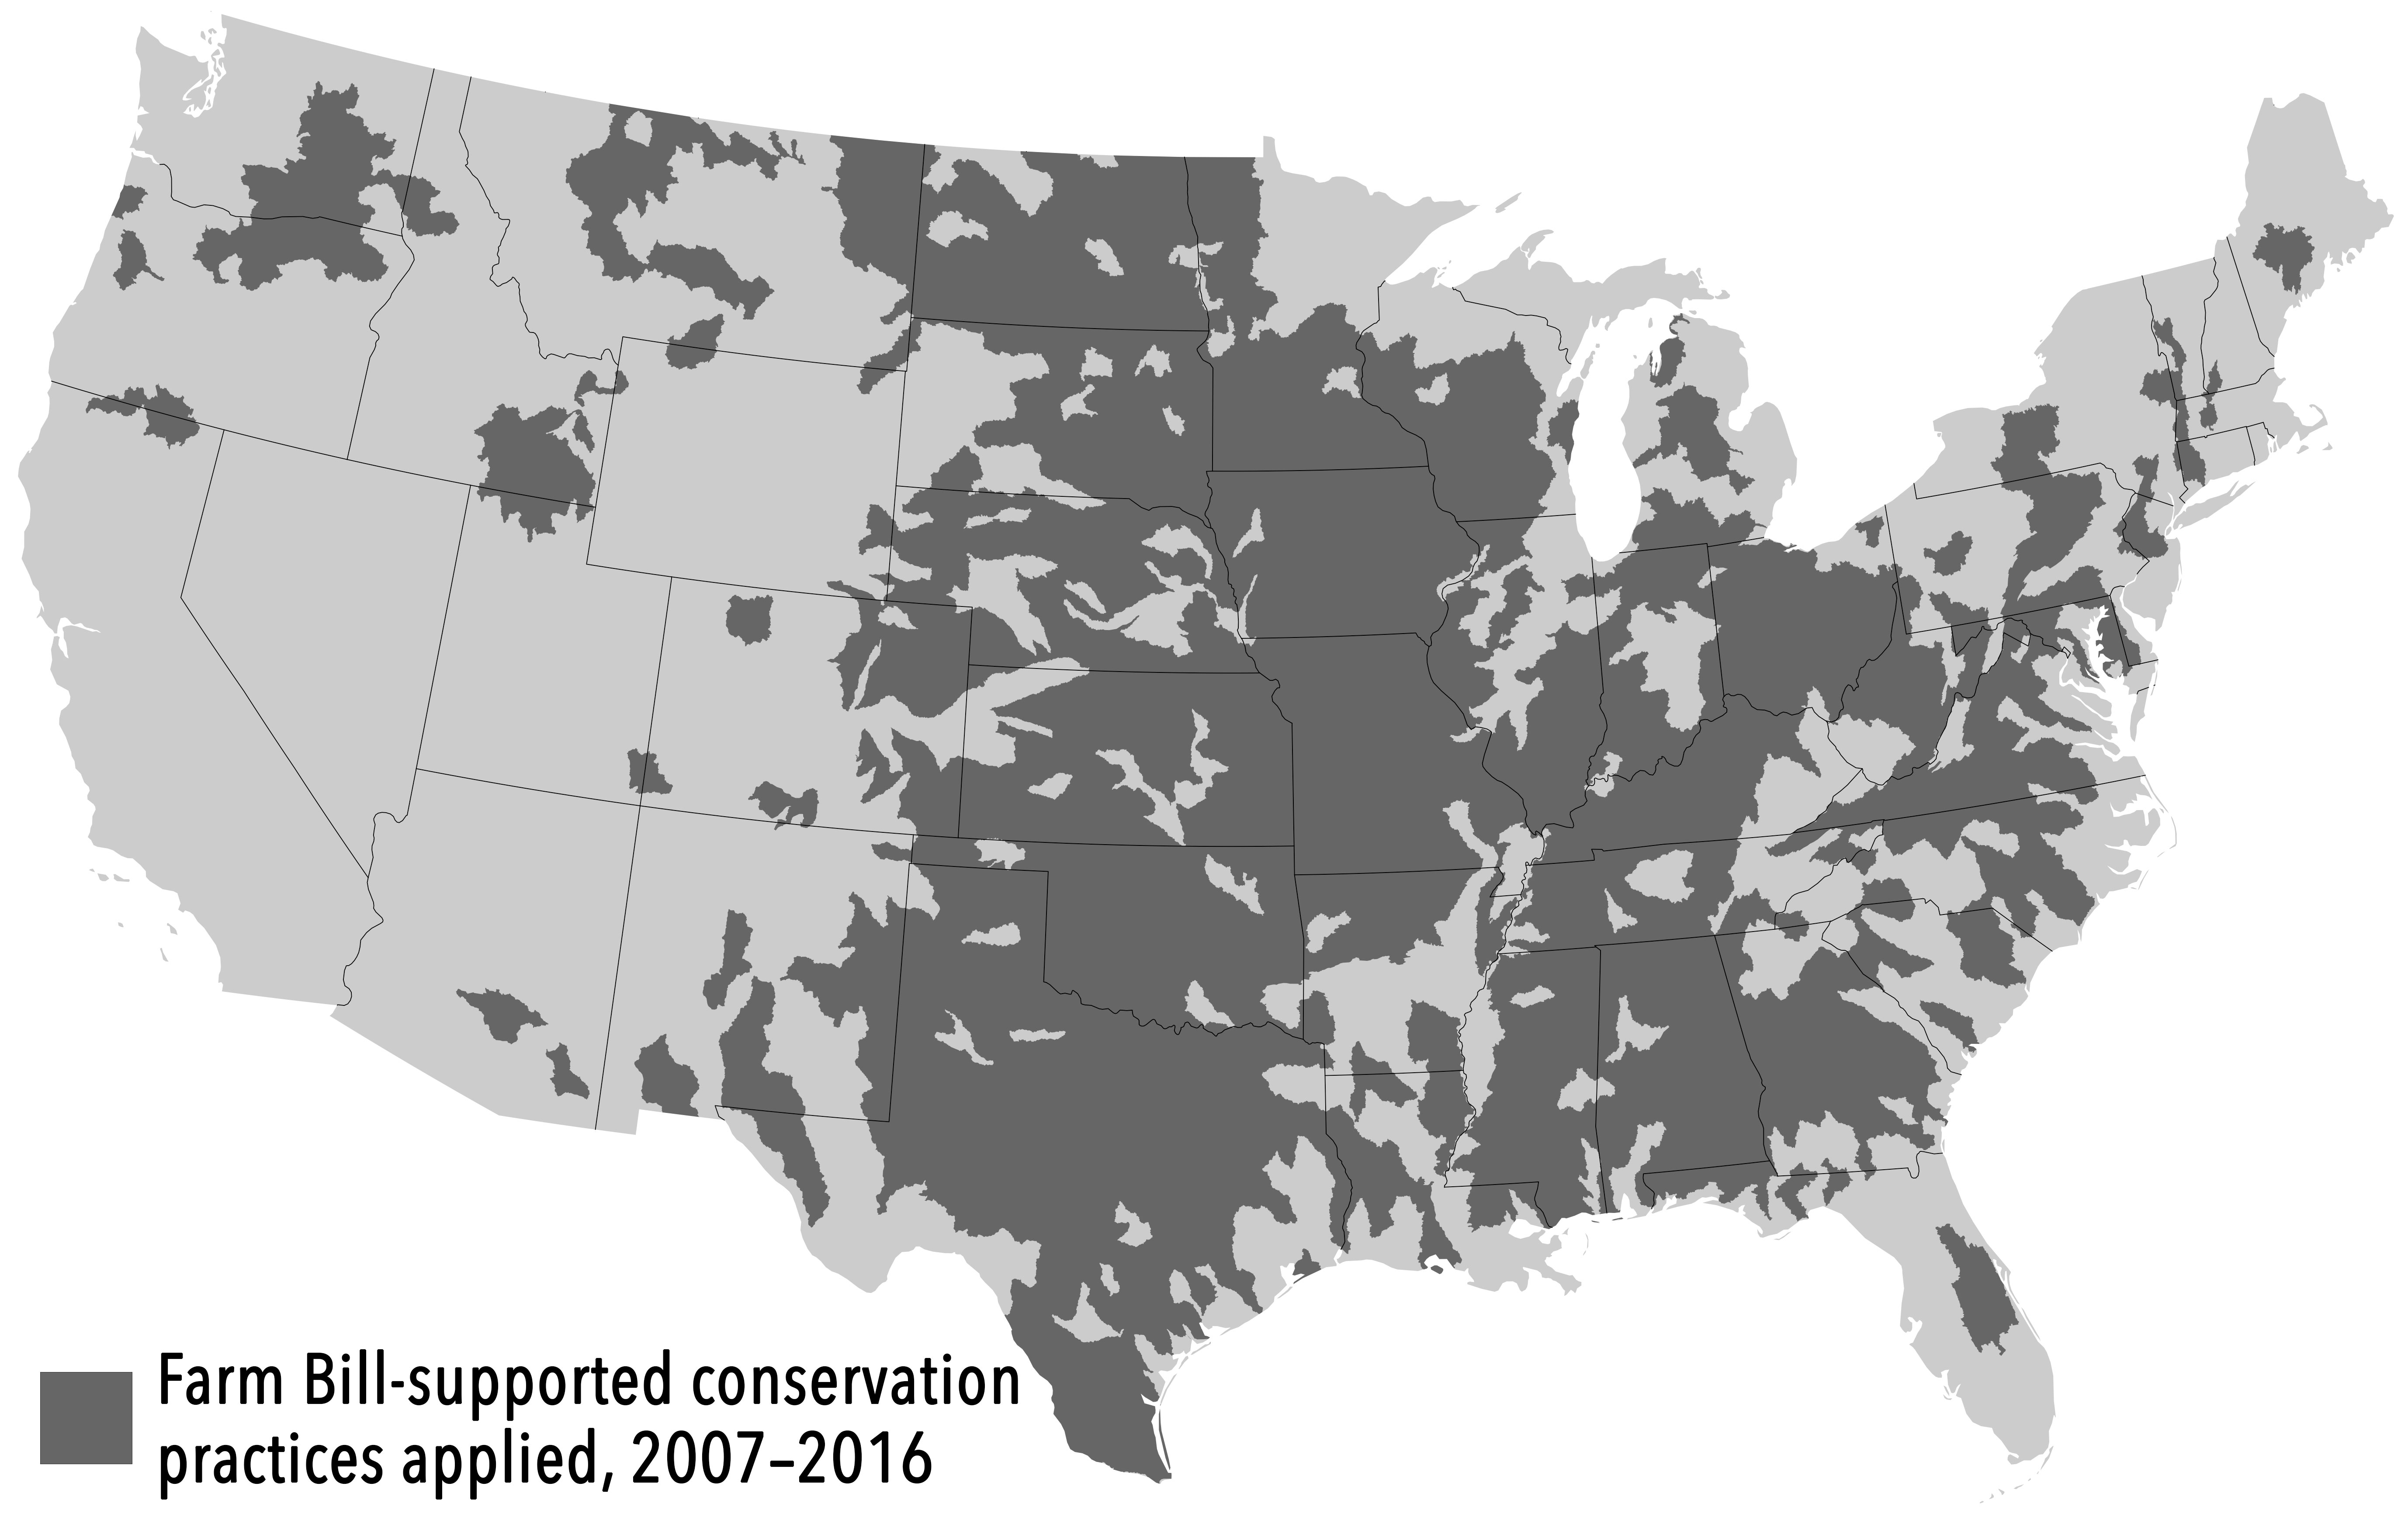 map of farm-bill-supported conservation practices on private lands, 2007-2016